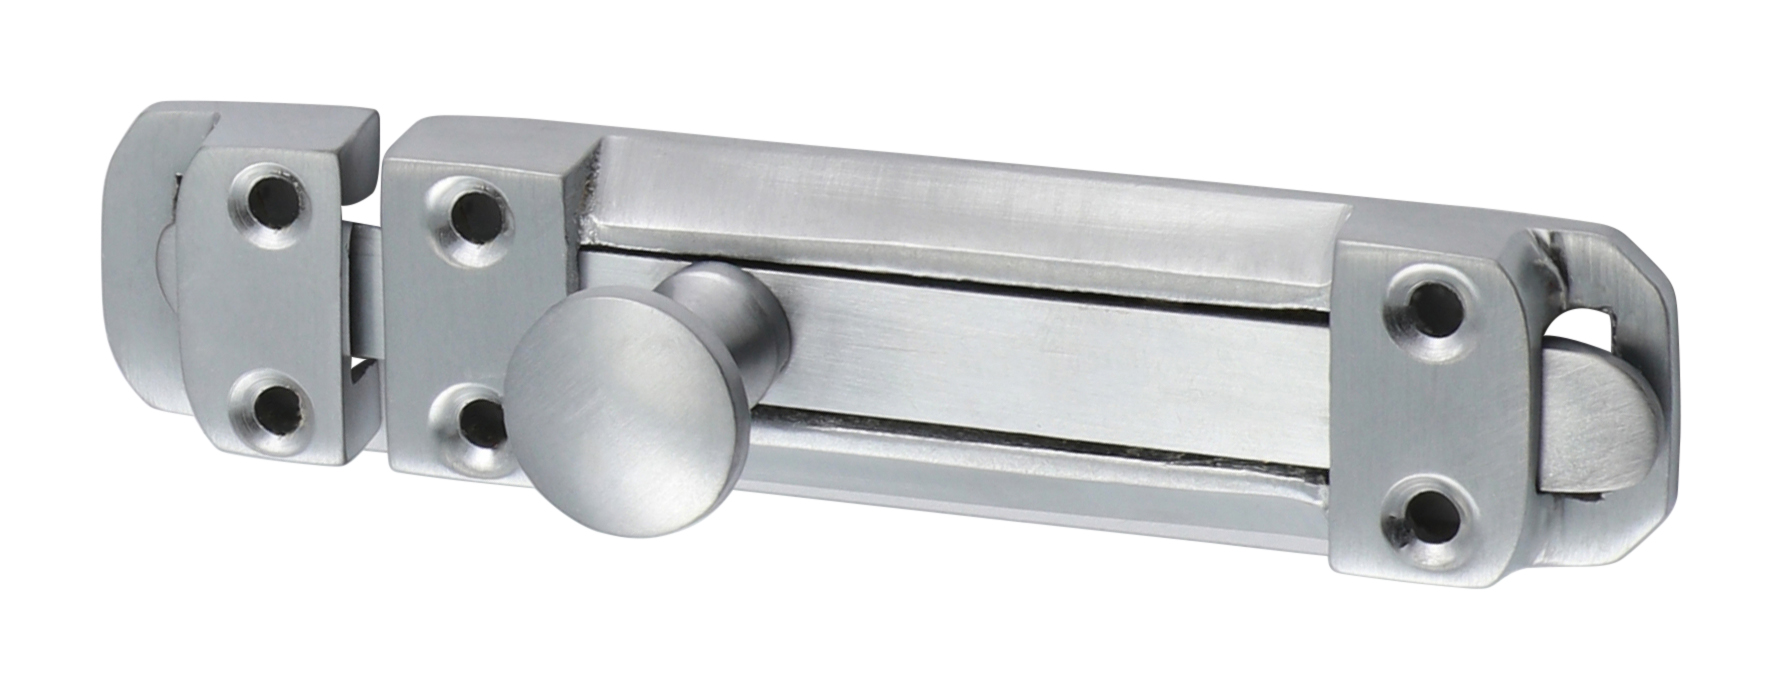 110 x 25mm Contract Flat Section Bolt - Satin Chrome